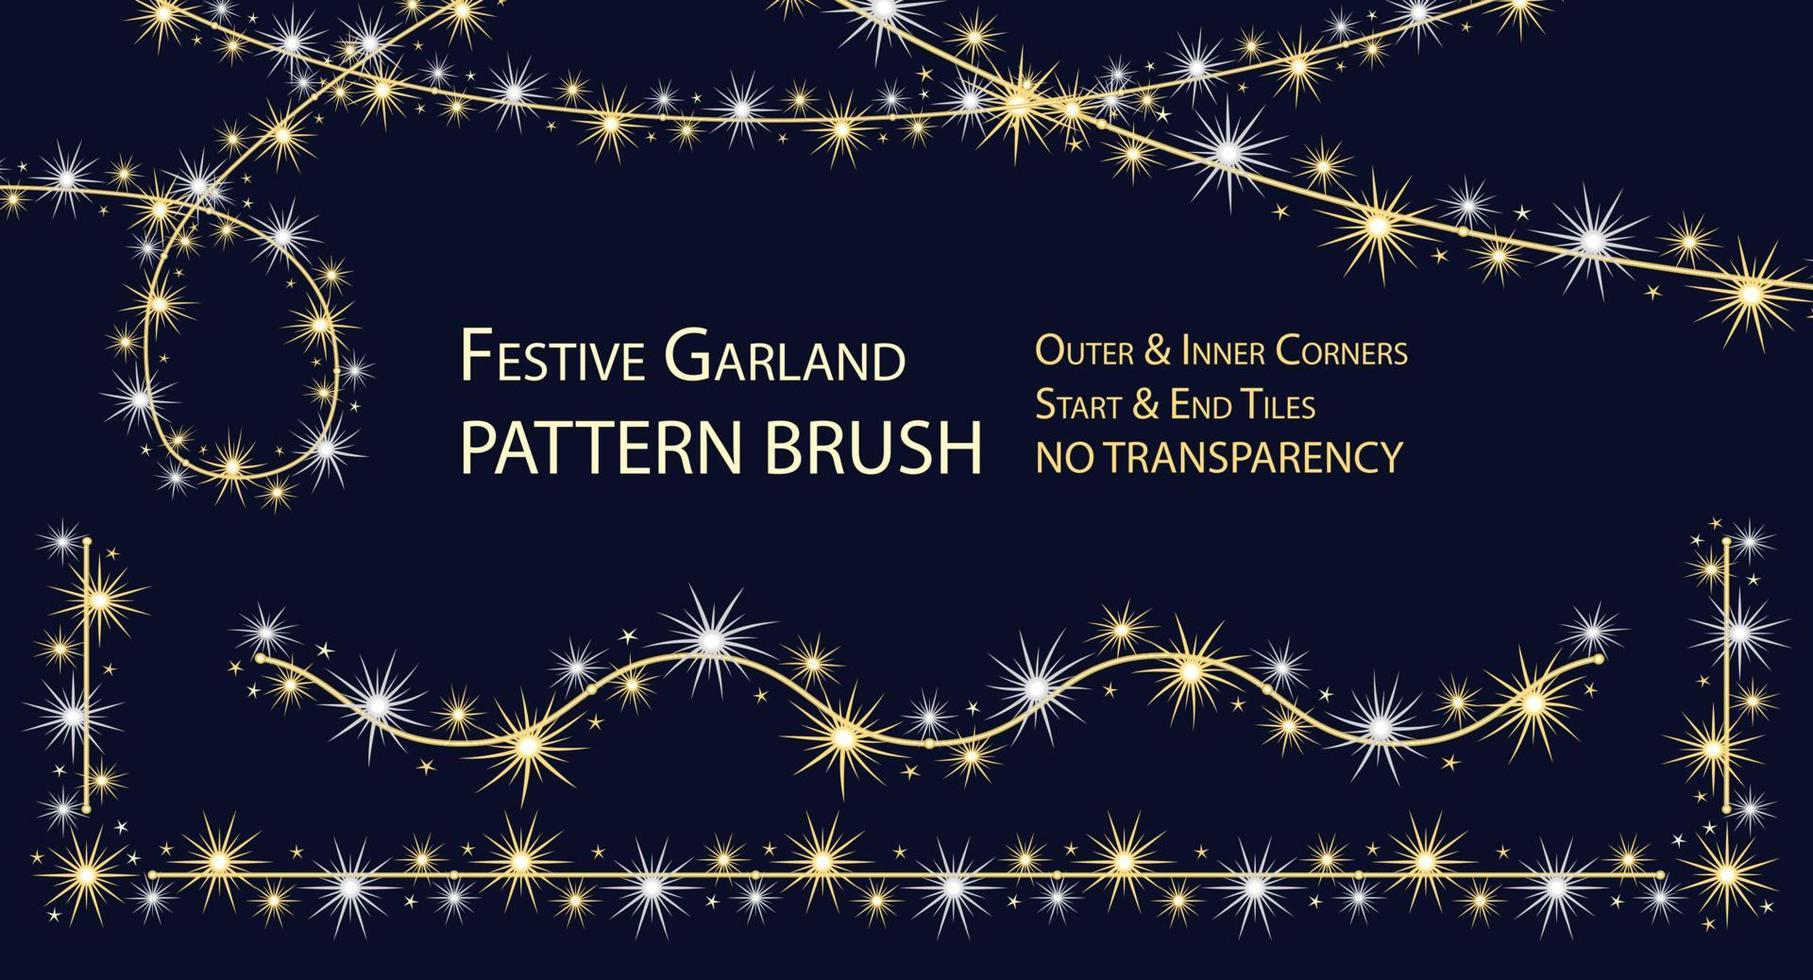 Pattern seamless brush with festive garland like sparkler. White and light yellow glowing sparkles, stars on wire strings. Full completed brush with corners, start and end tiles. No transparency vector